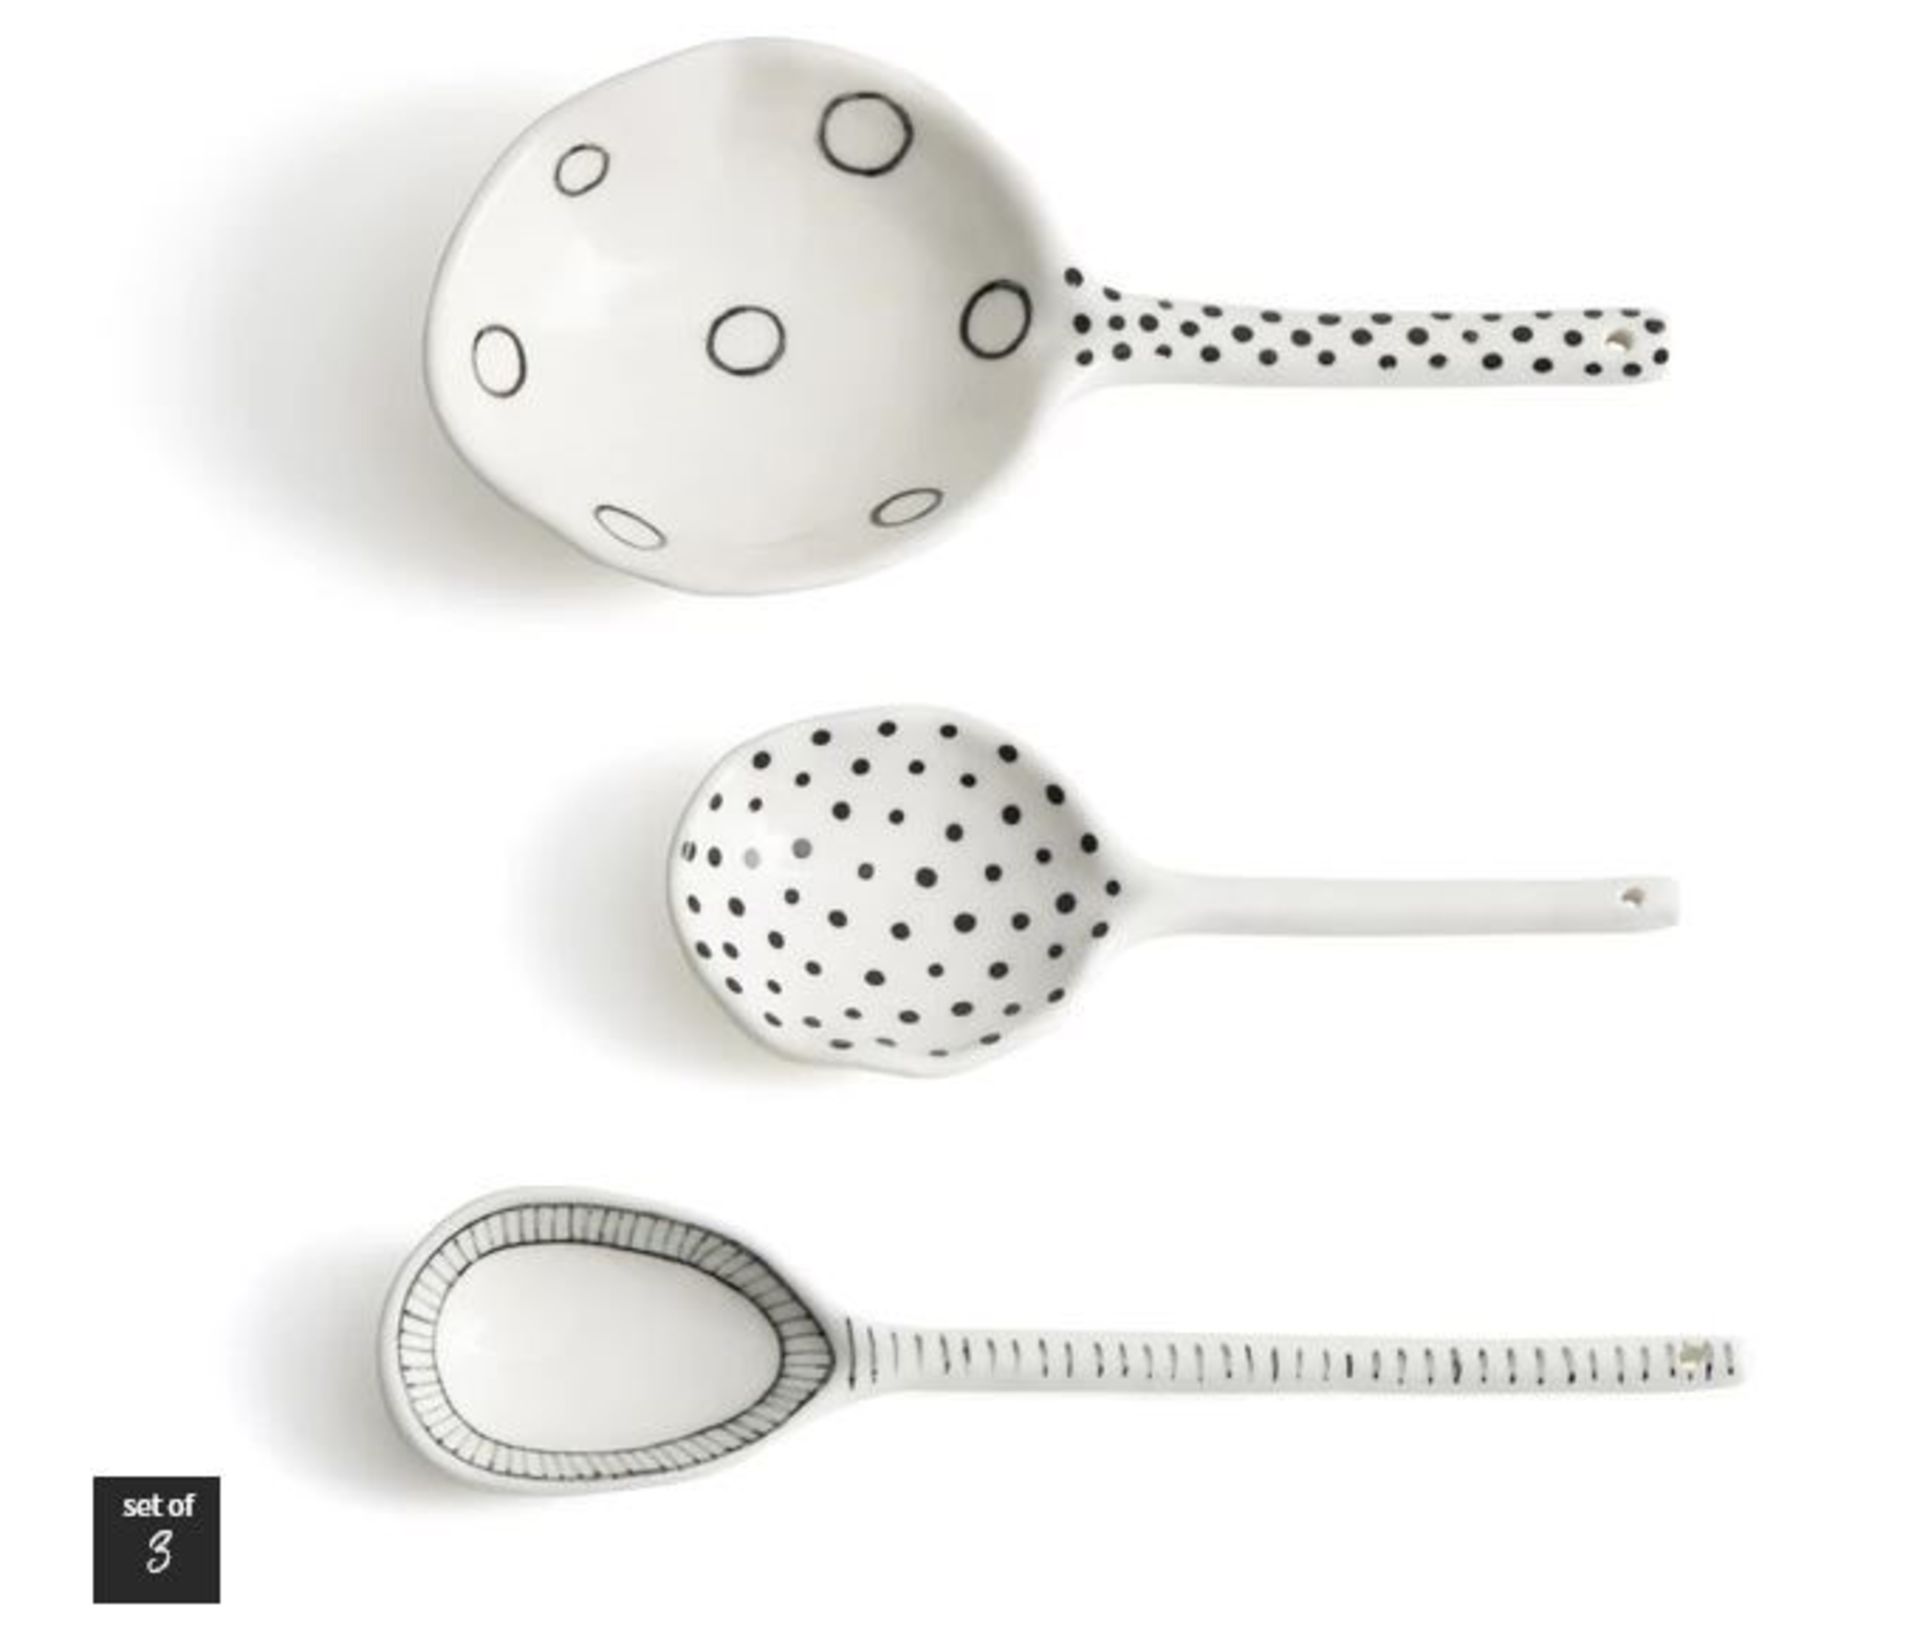 1 X LA REDOUTE SET OF 3 JIKKI PORCELAIN SPOONS IN BLACK AND WHITE / RRP £48.00 / GRADE A